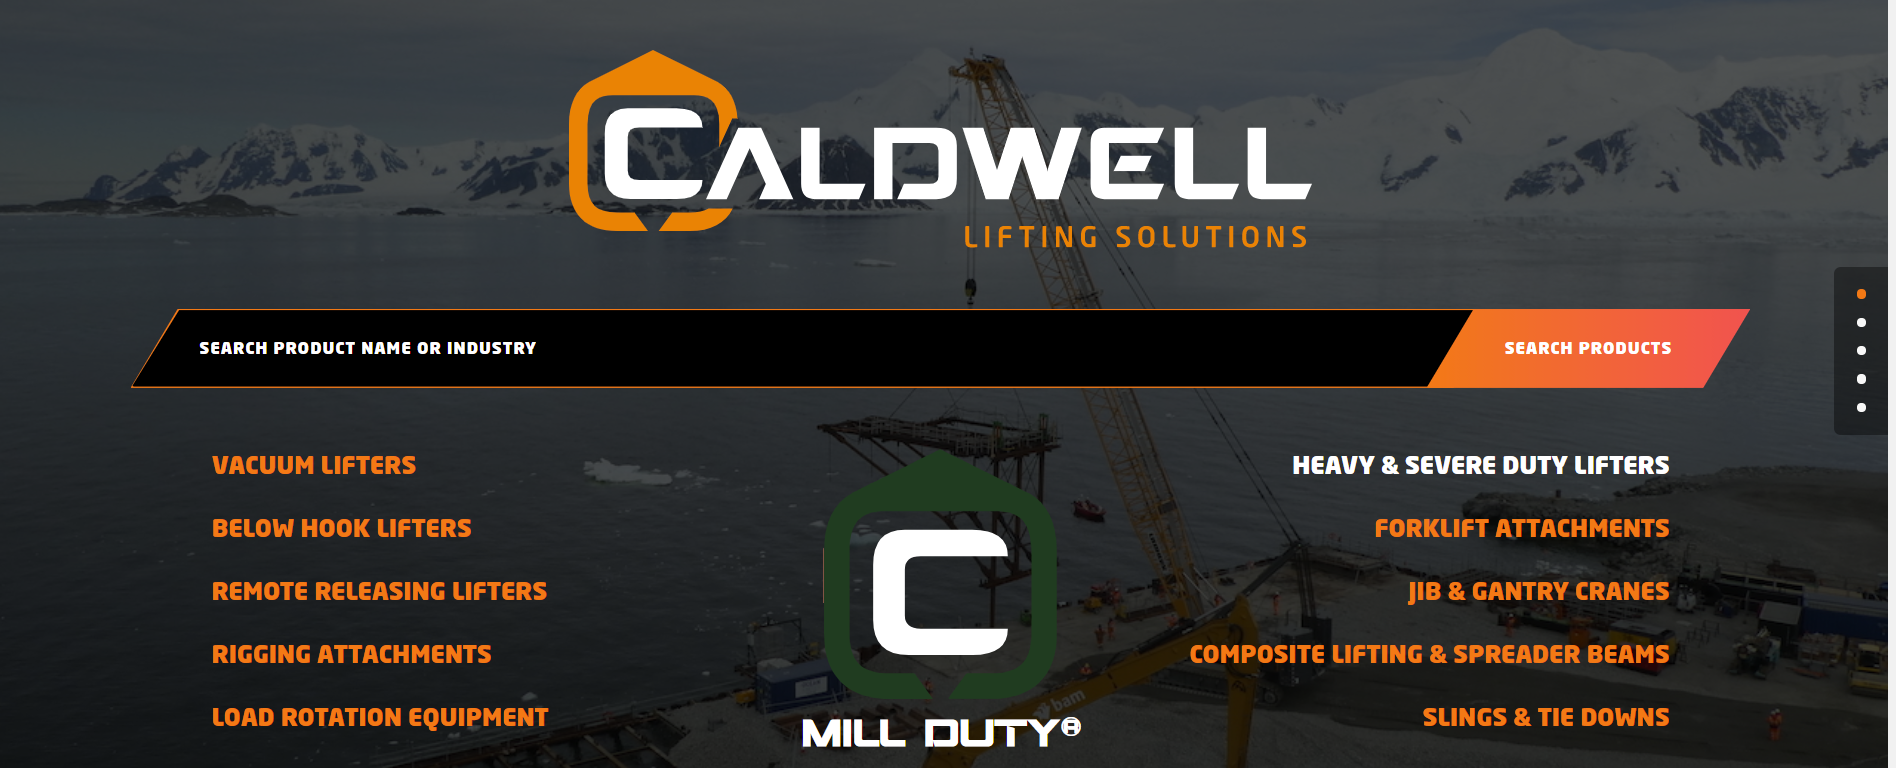 Caldwell Launches New Website, Rebrands @CaldwellRenfroe